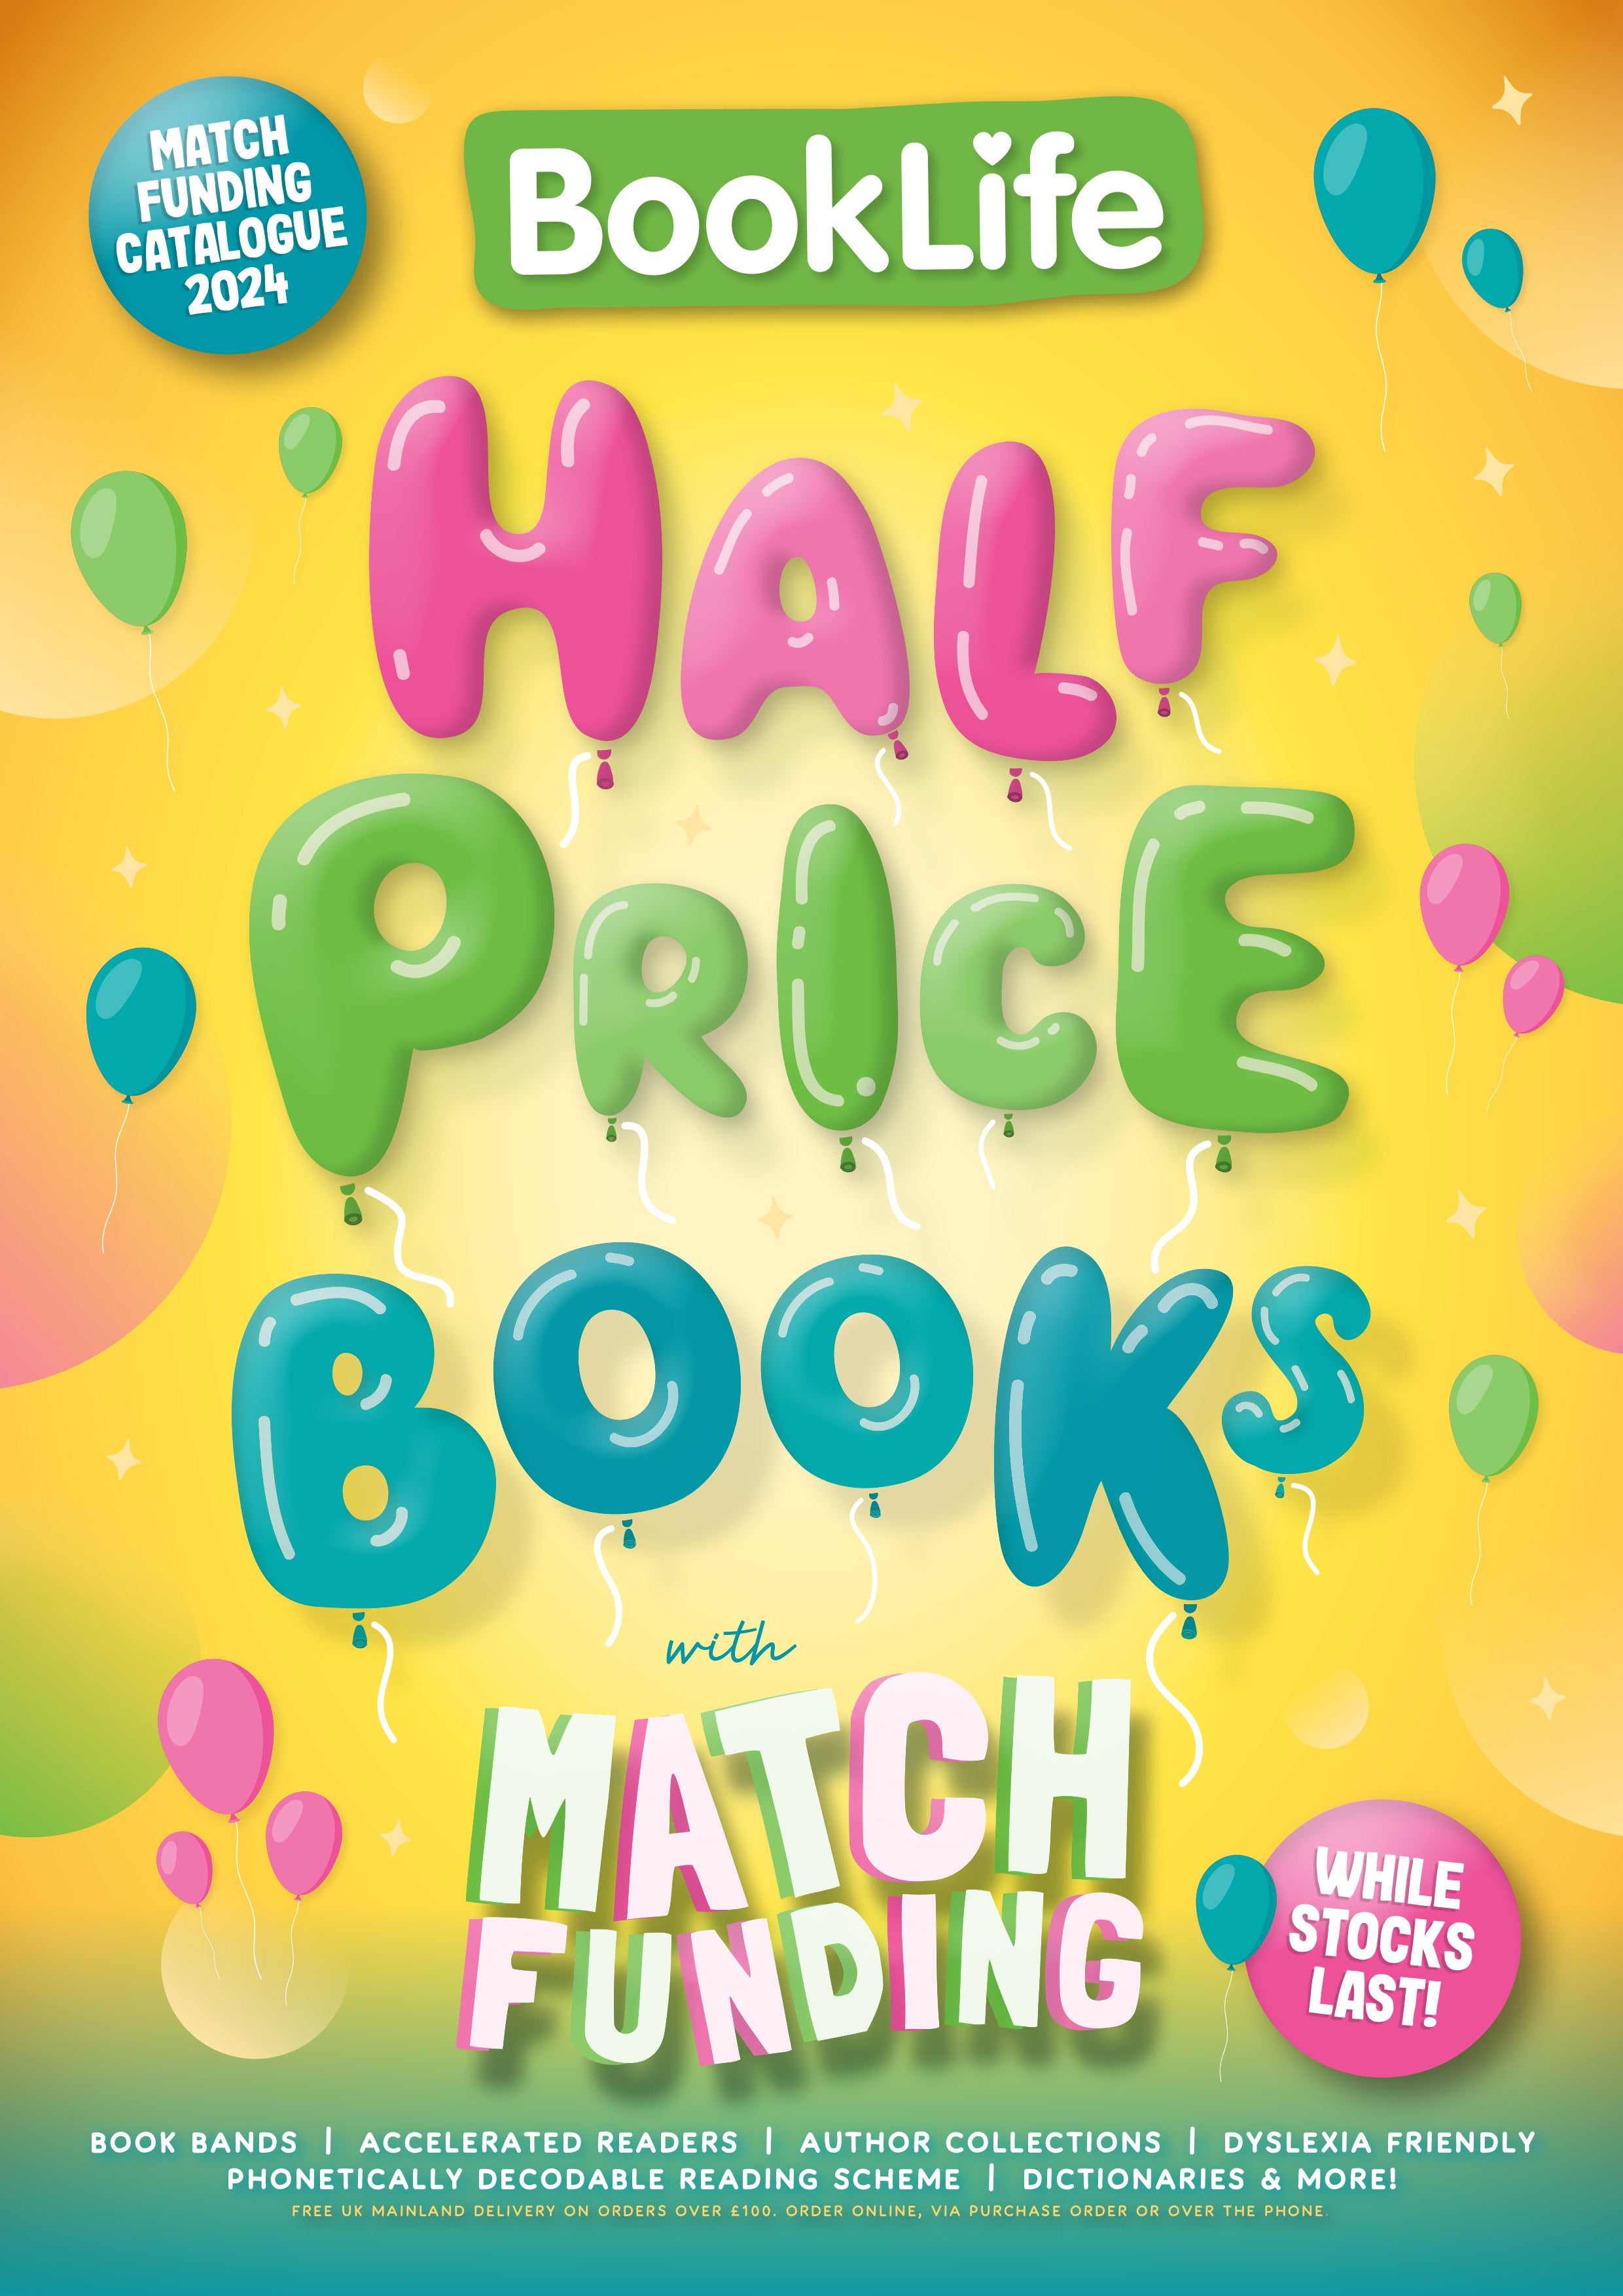 BookLife’s Match Funding Catalogue - Physical Copy